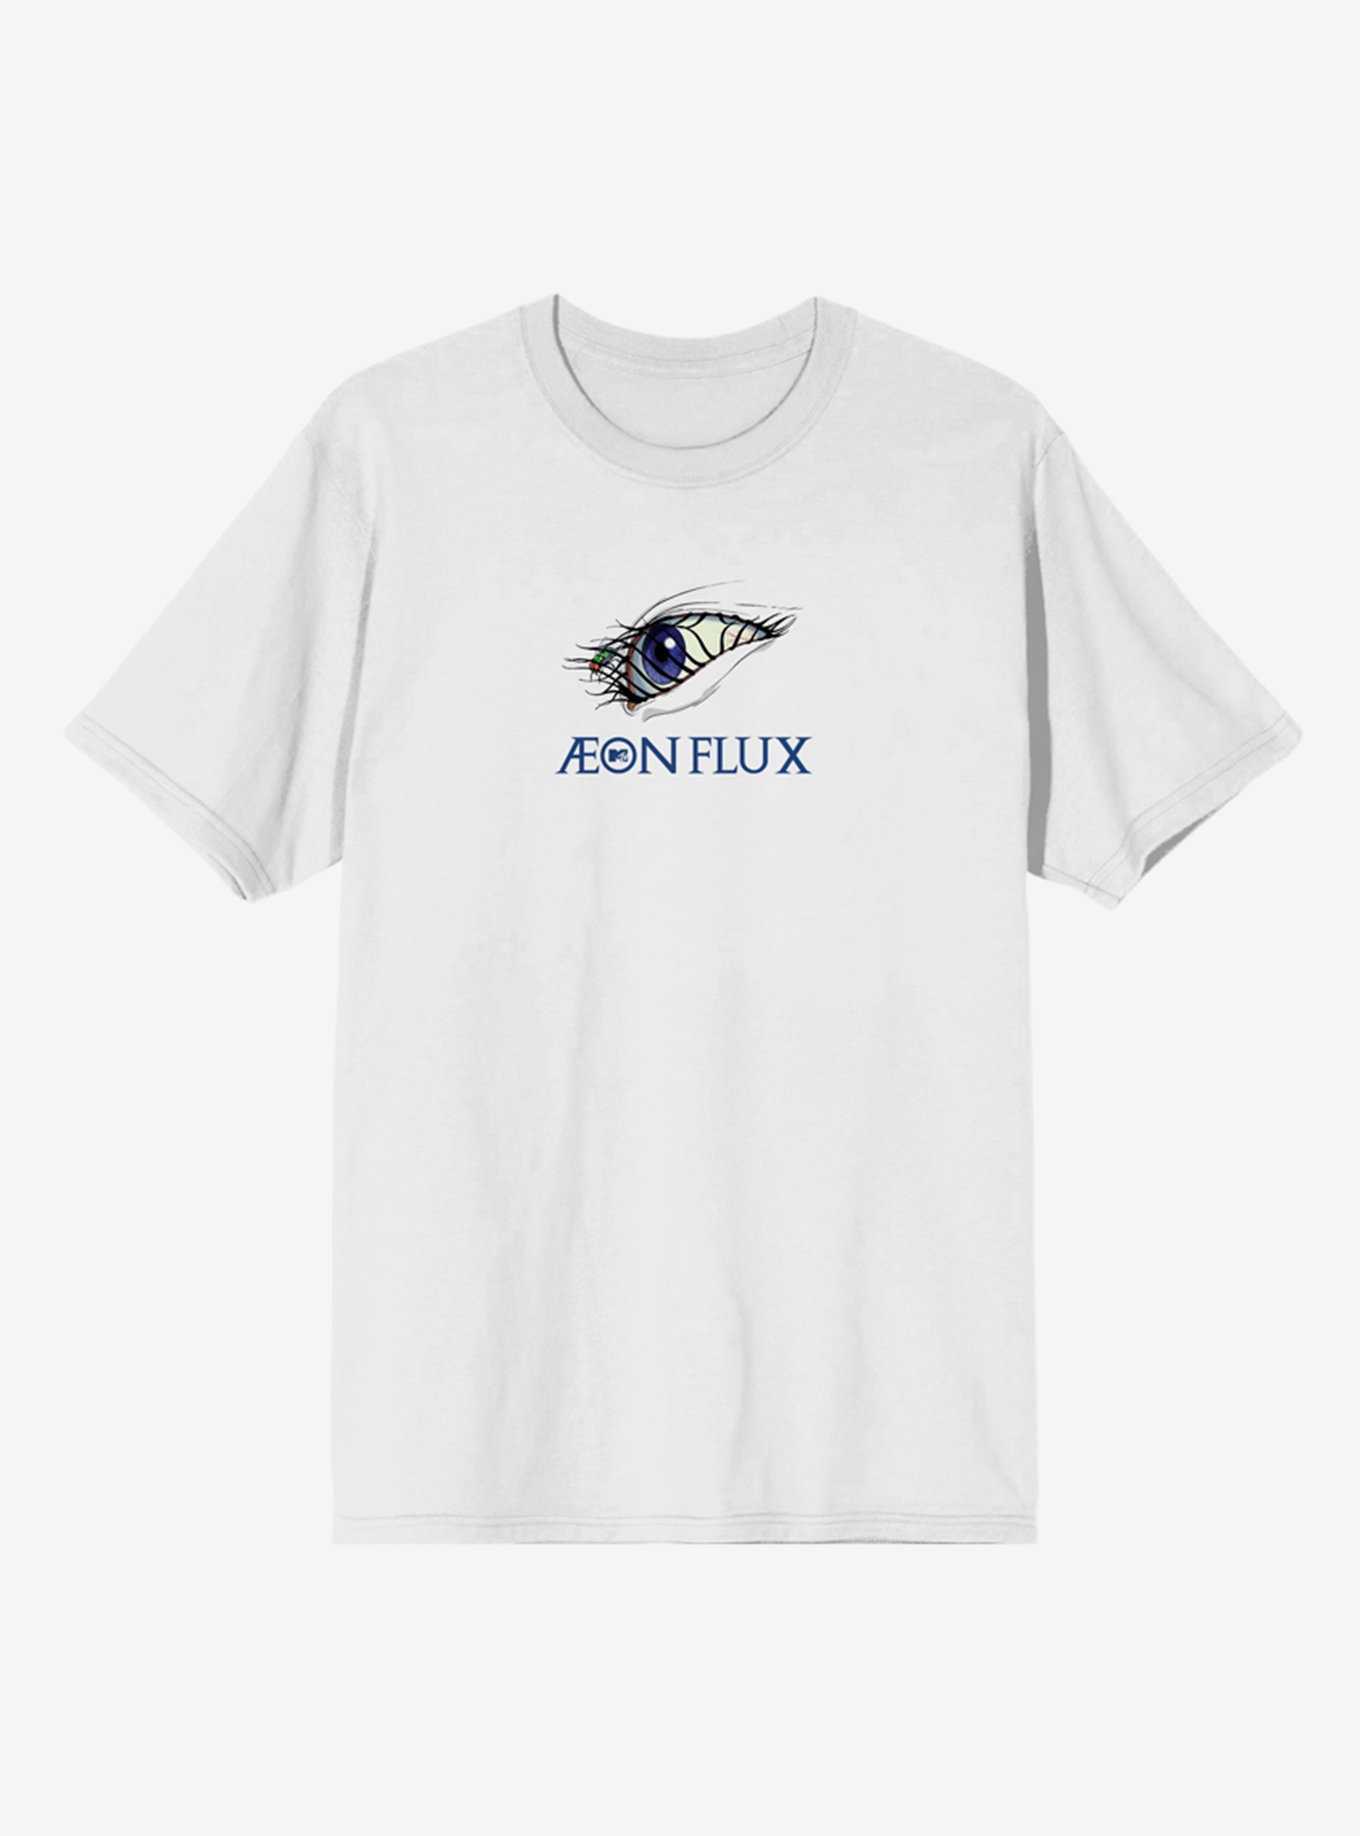 Aeon Flux Opening Sequence Eye T-Shirt, , hi-res